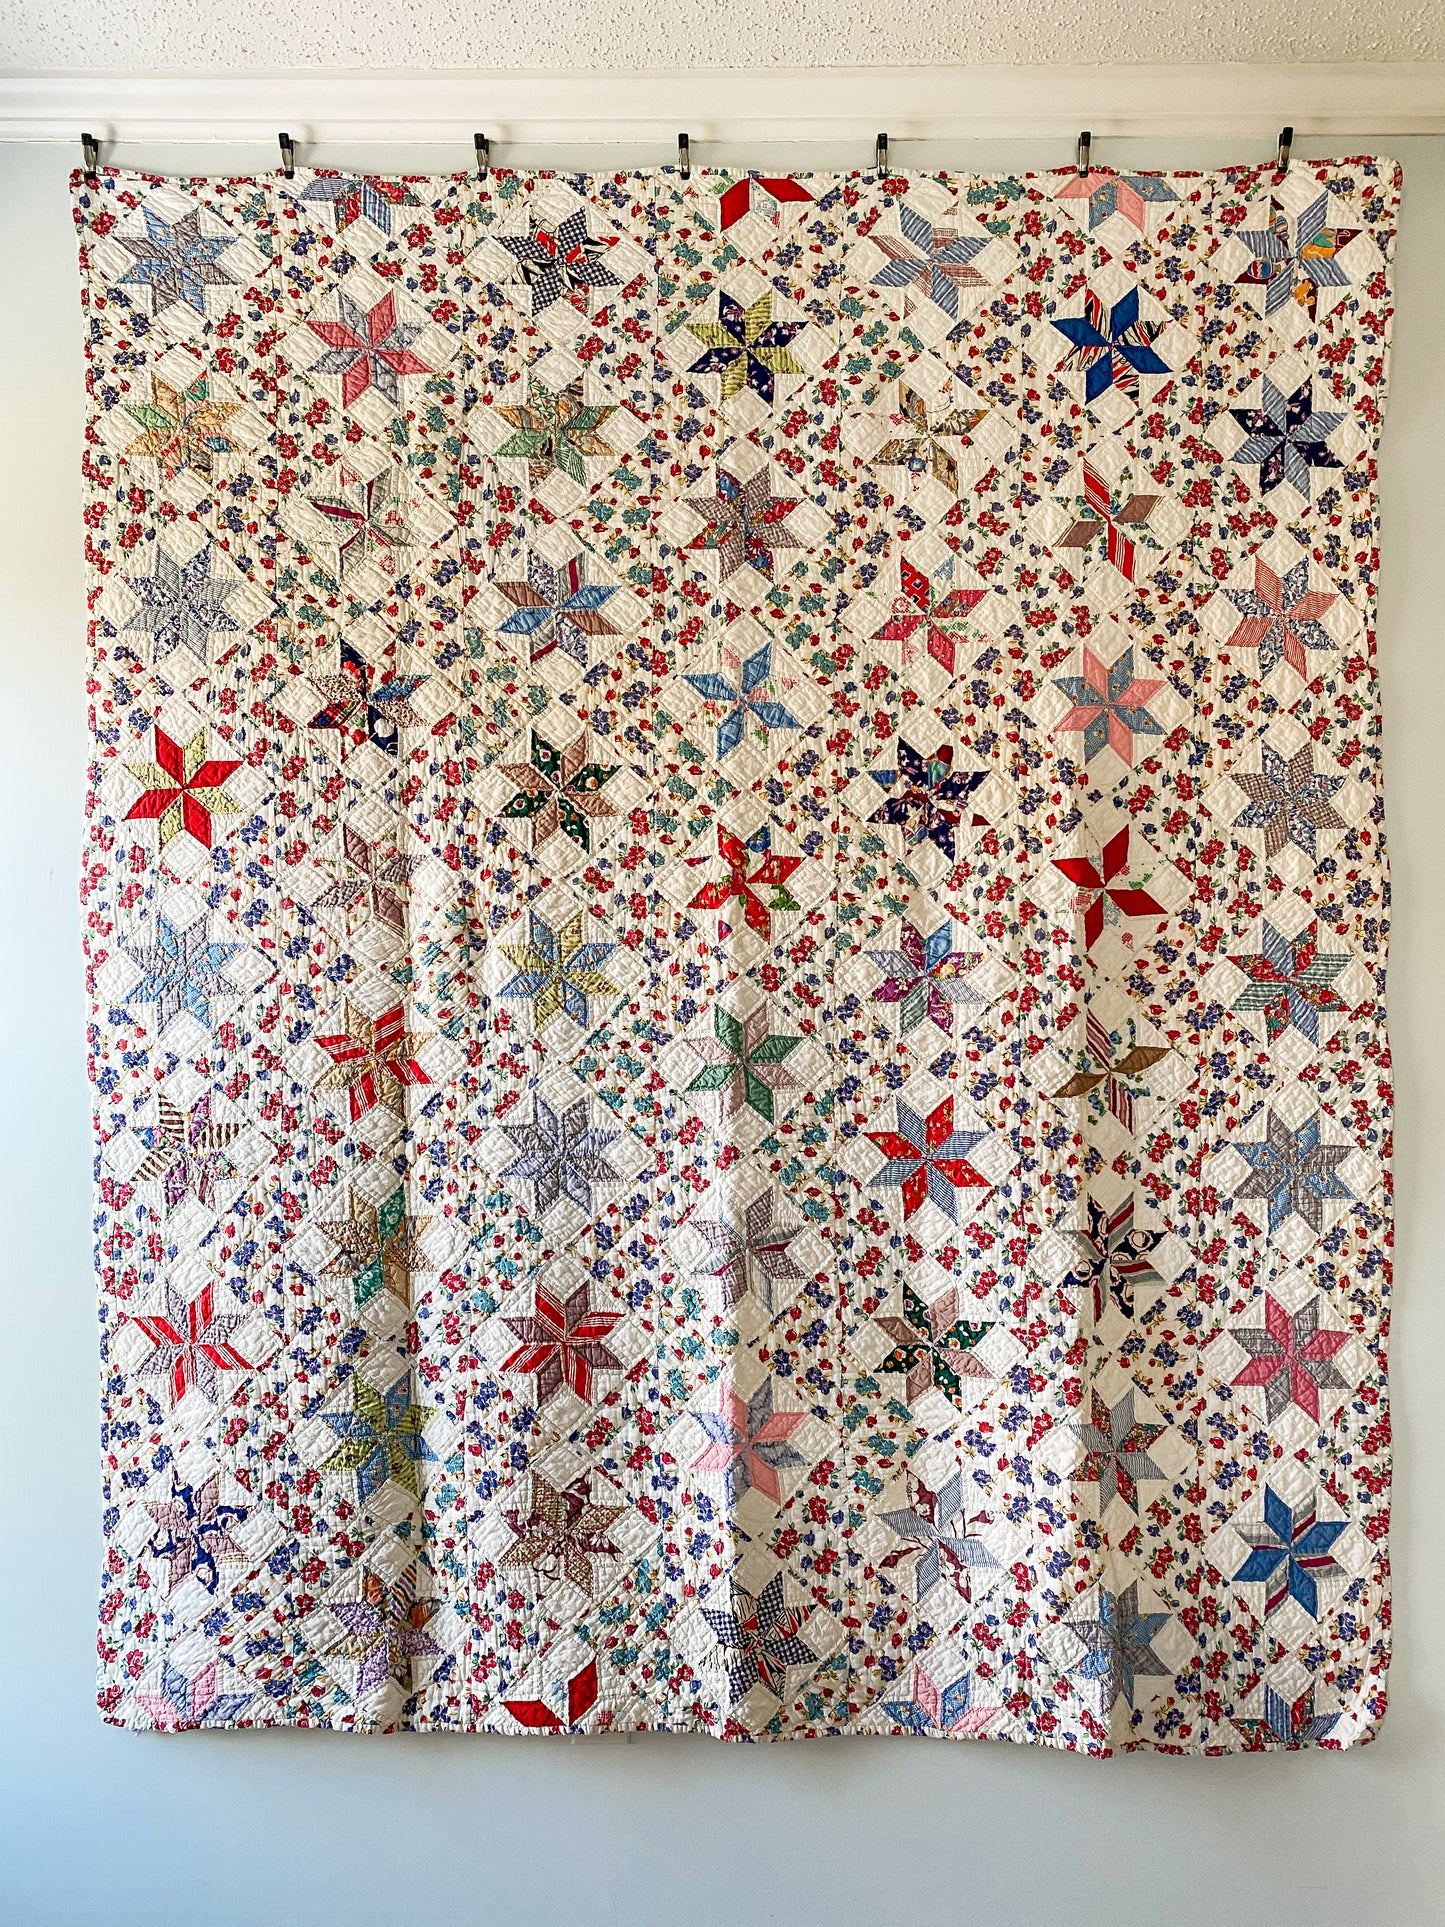 Vintage 8 Pointed Star Quilt with Signature and Printed Sashing, c1940